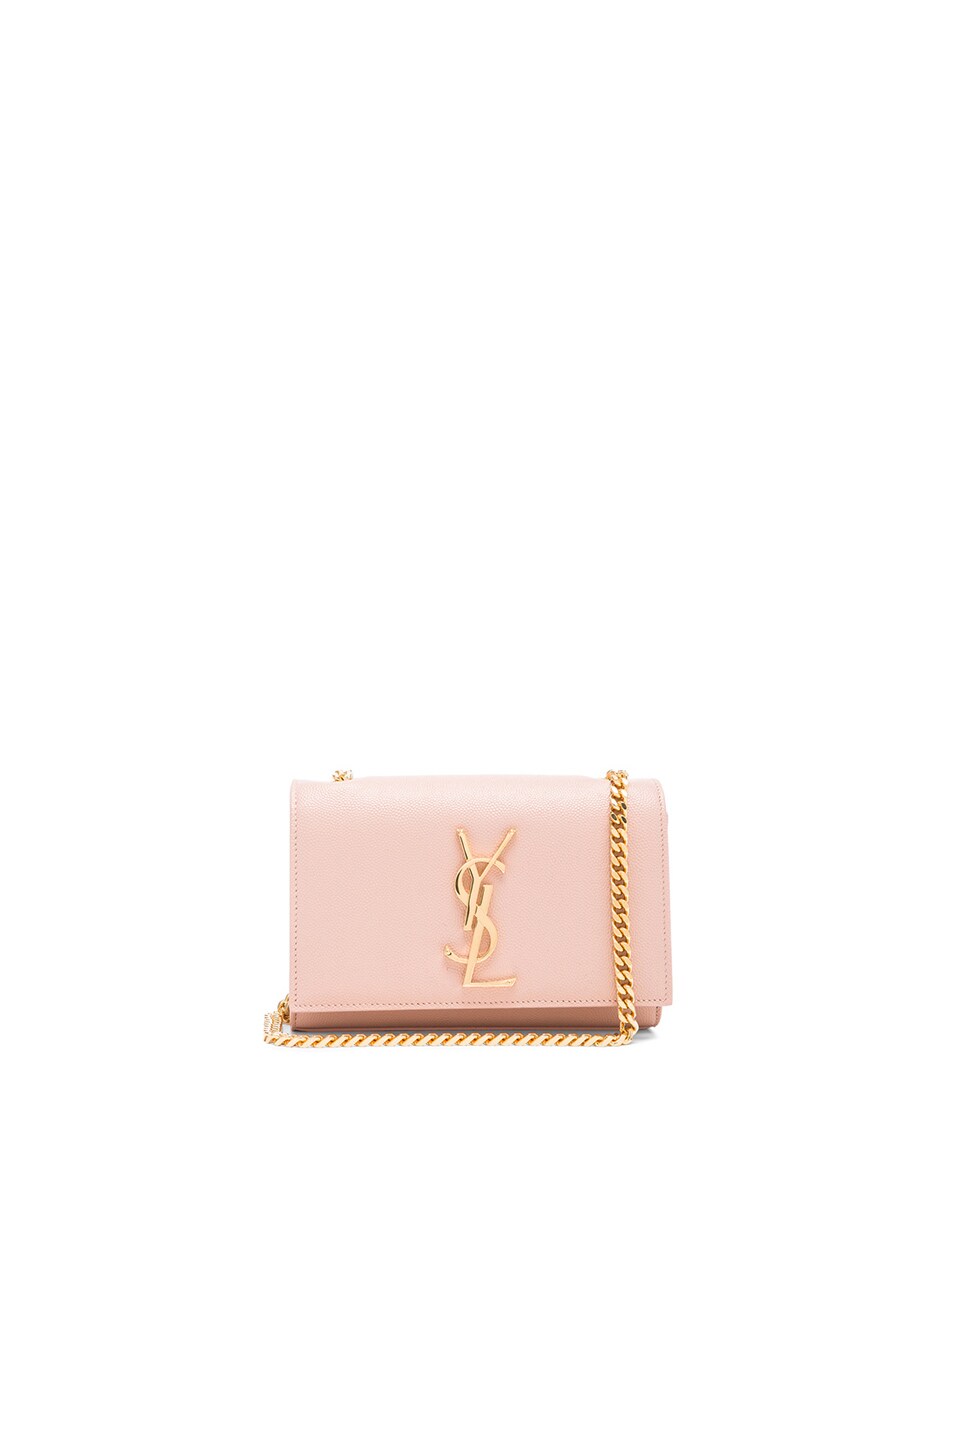 Image 1 of Saint Laurent Small Monogramme Chain Bag in Pale Blush